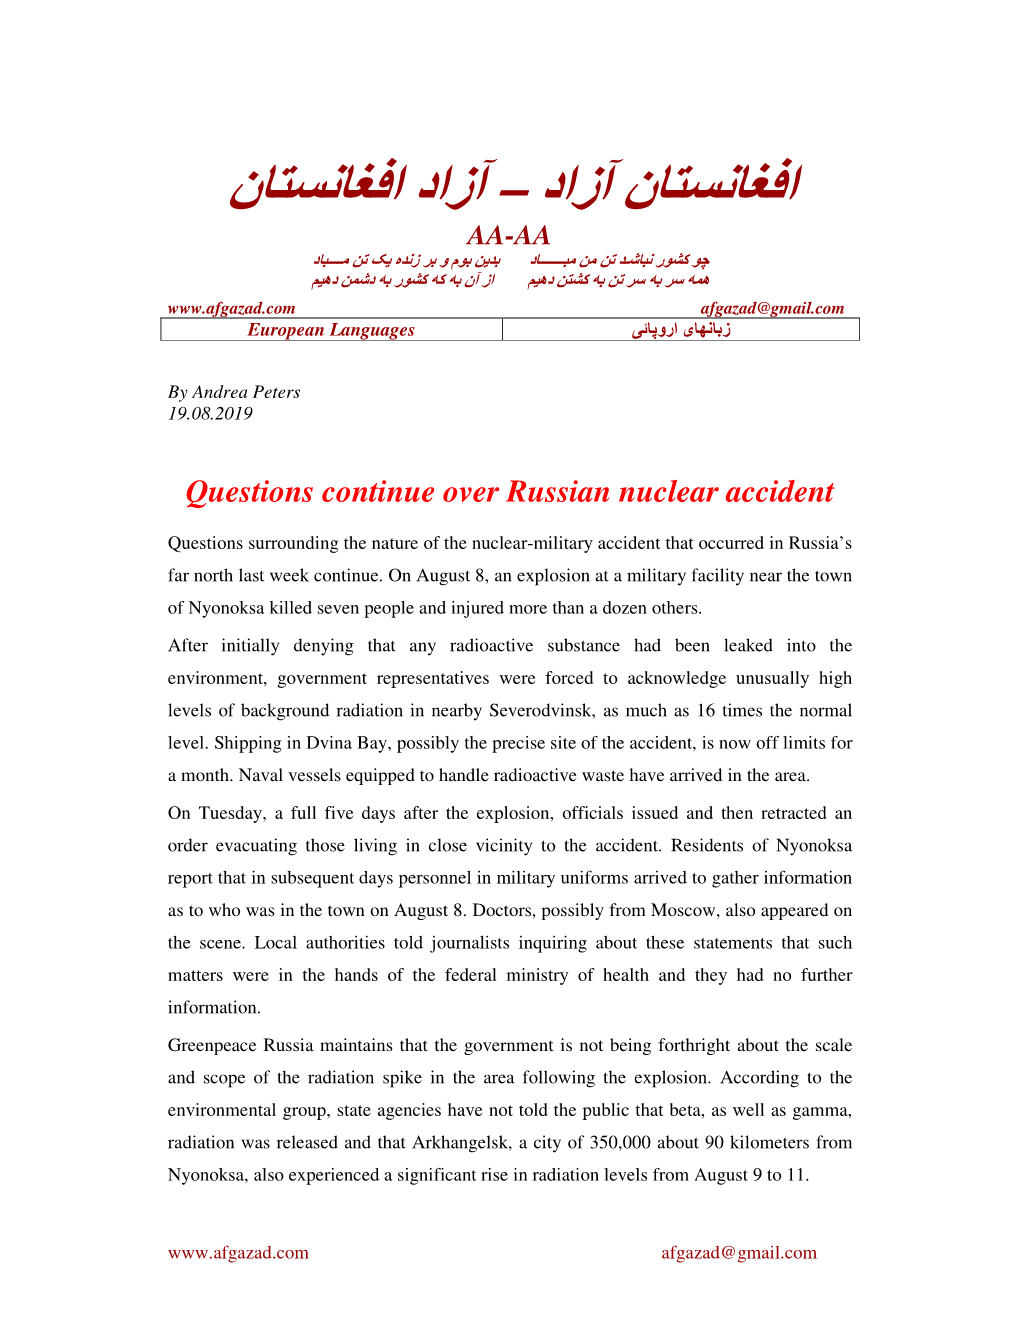 Questions Continue Over Russian Nuclear Accident